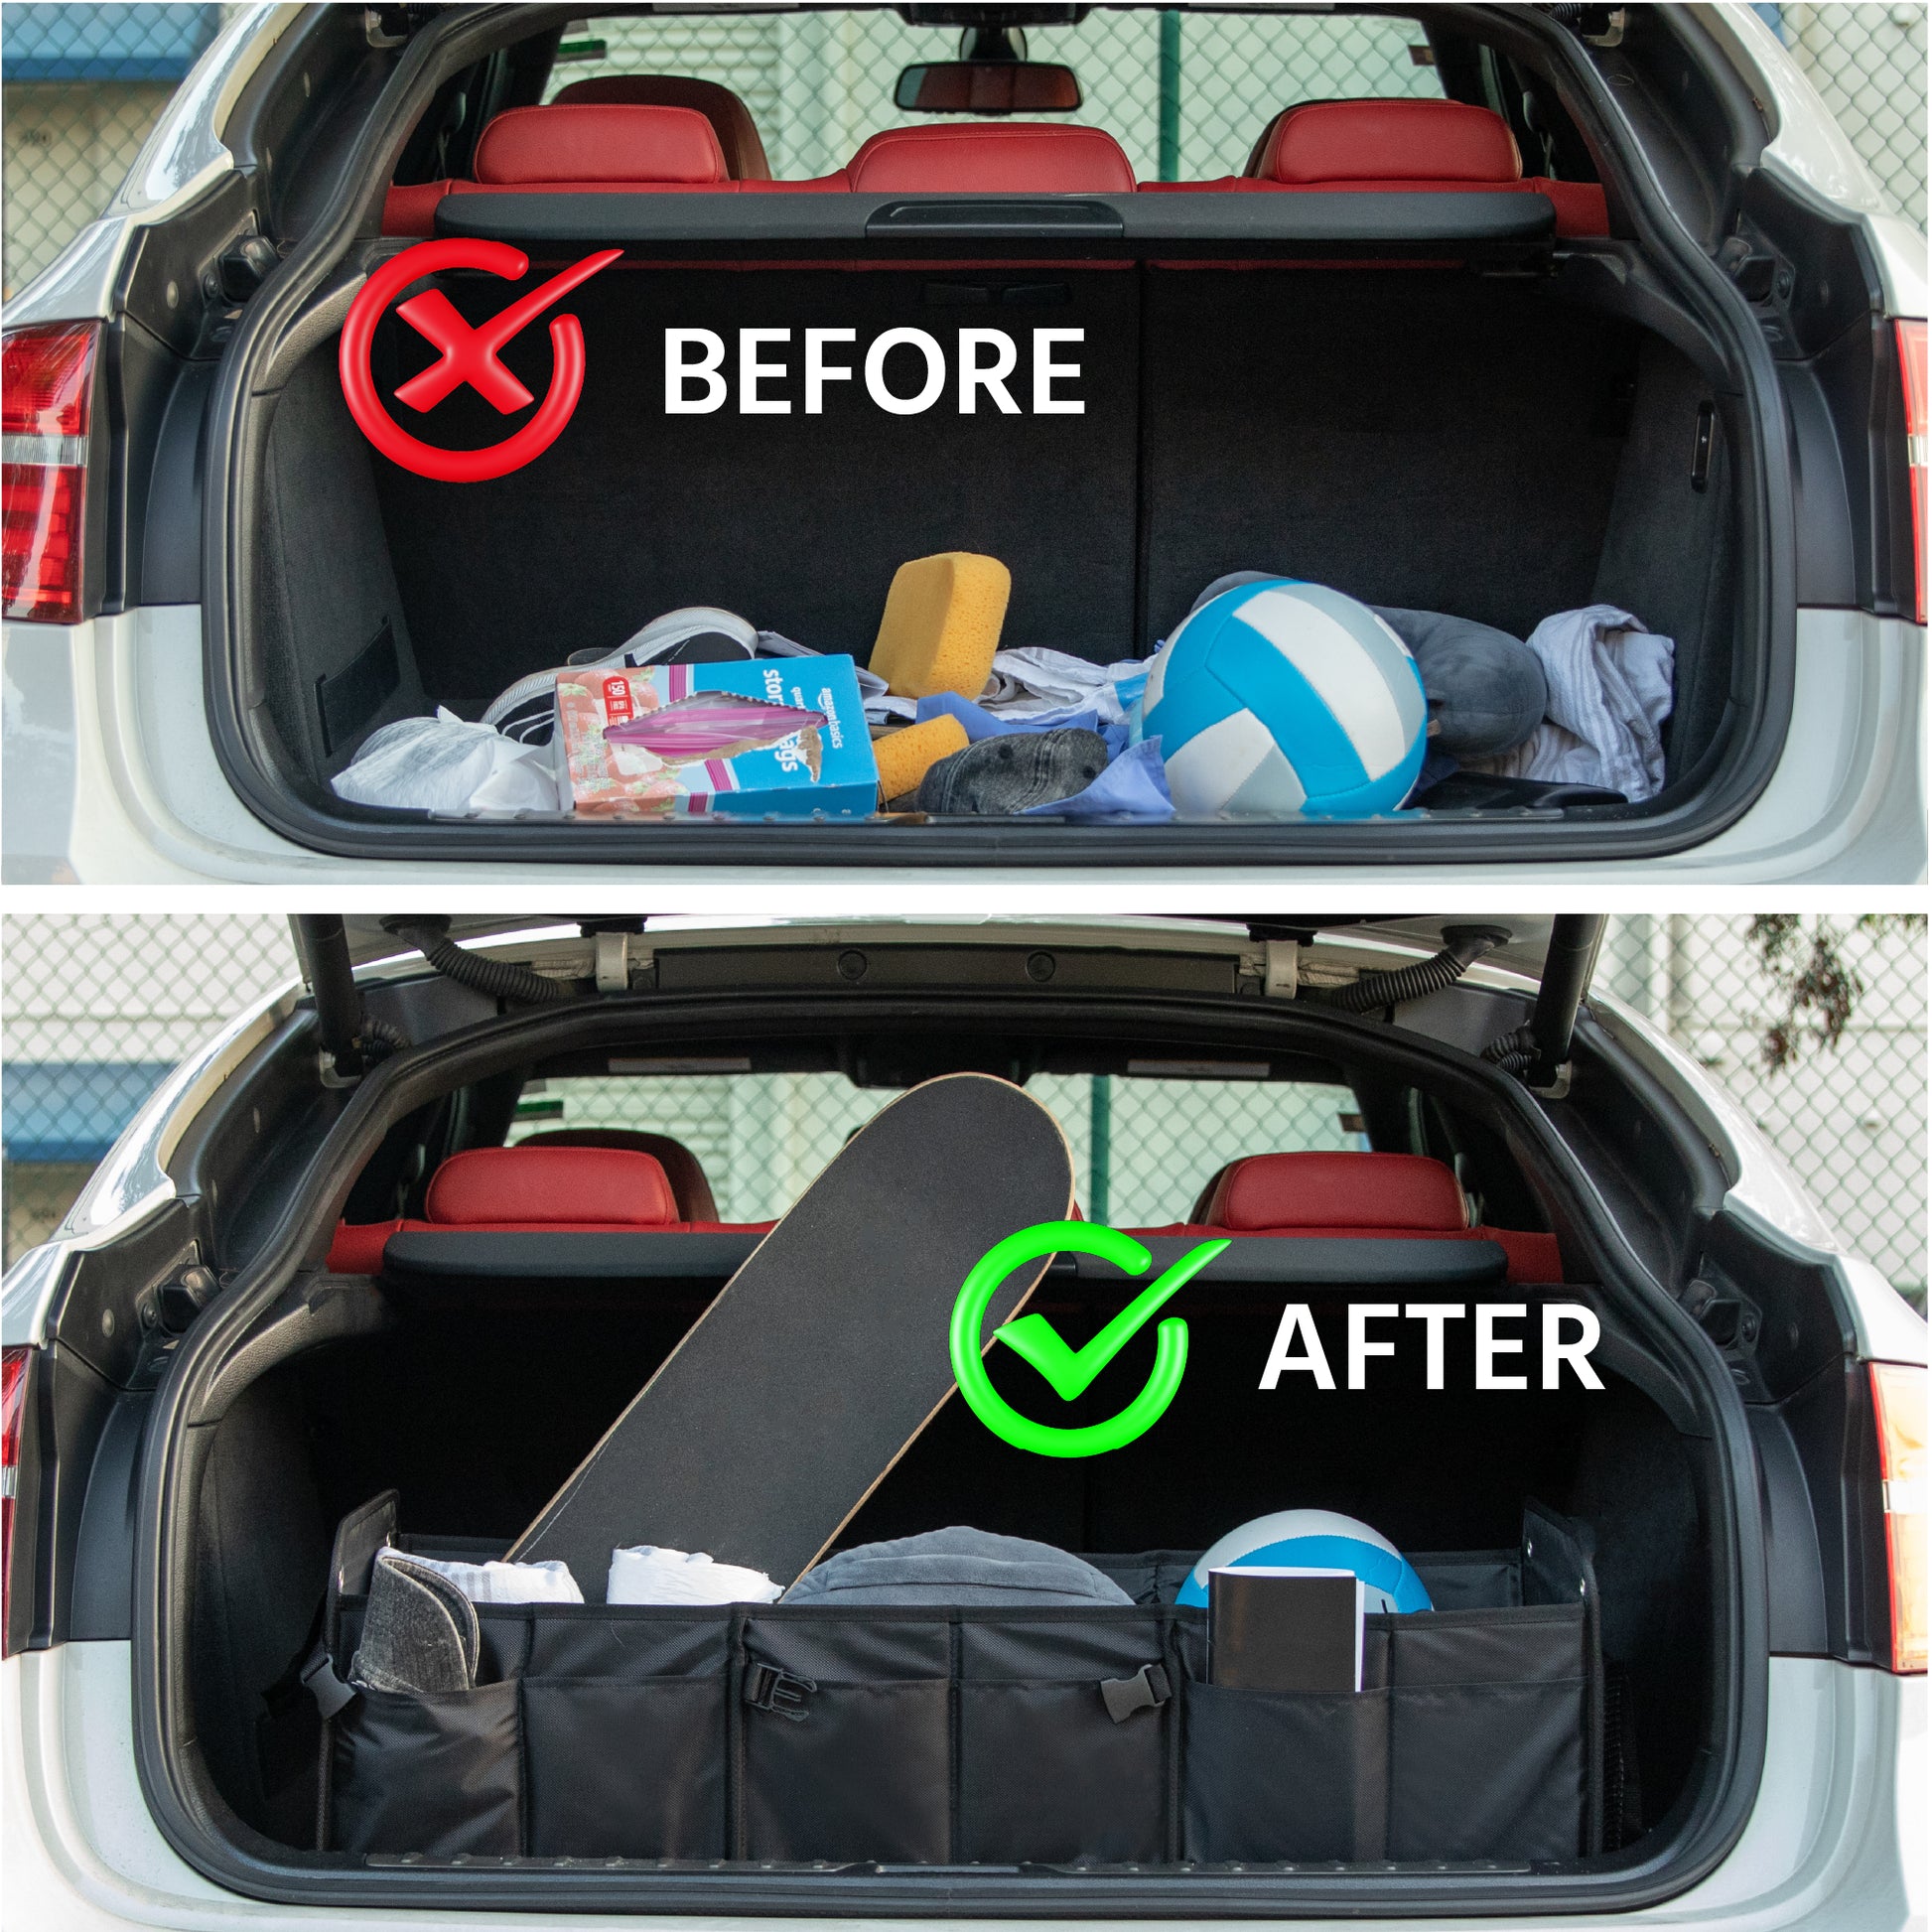  K KNODEL Car Trunk Organizer with Lid, Collapsible Car